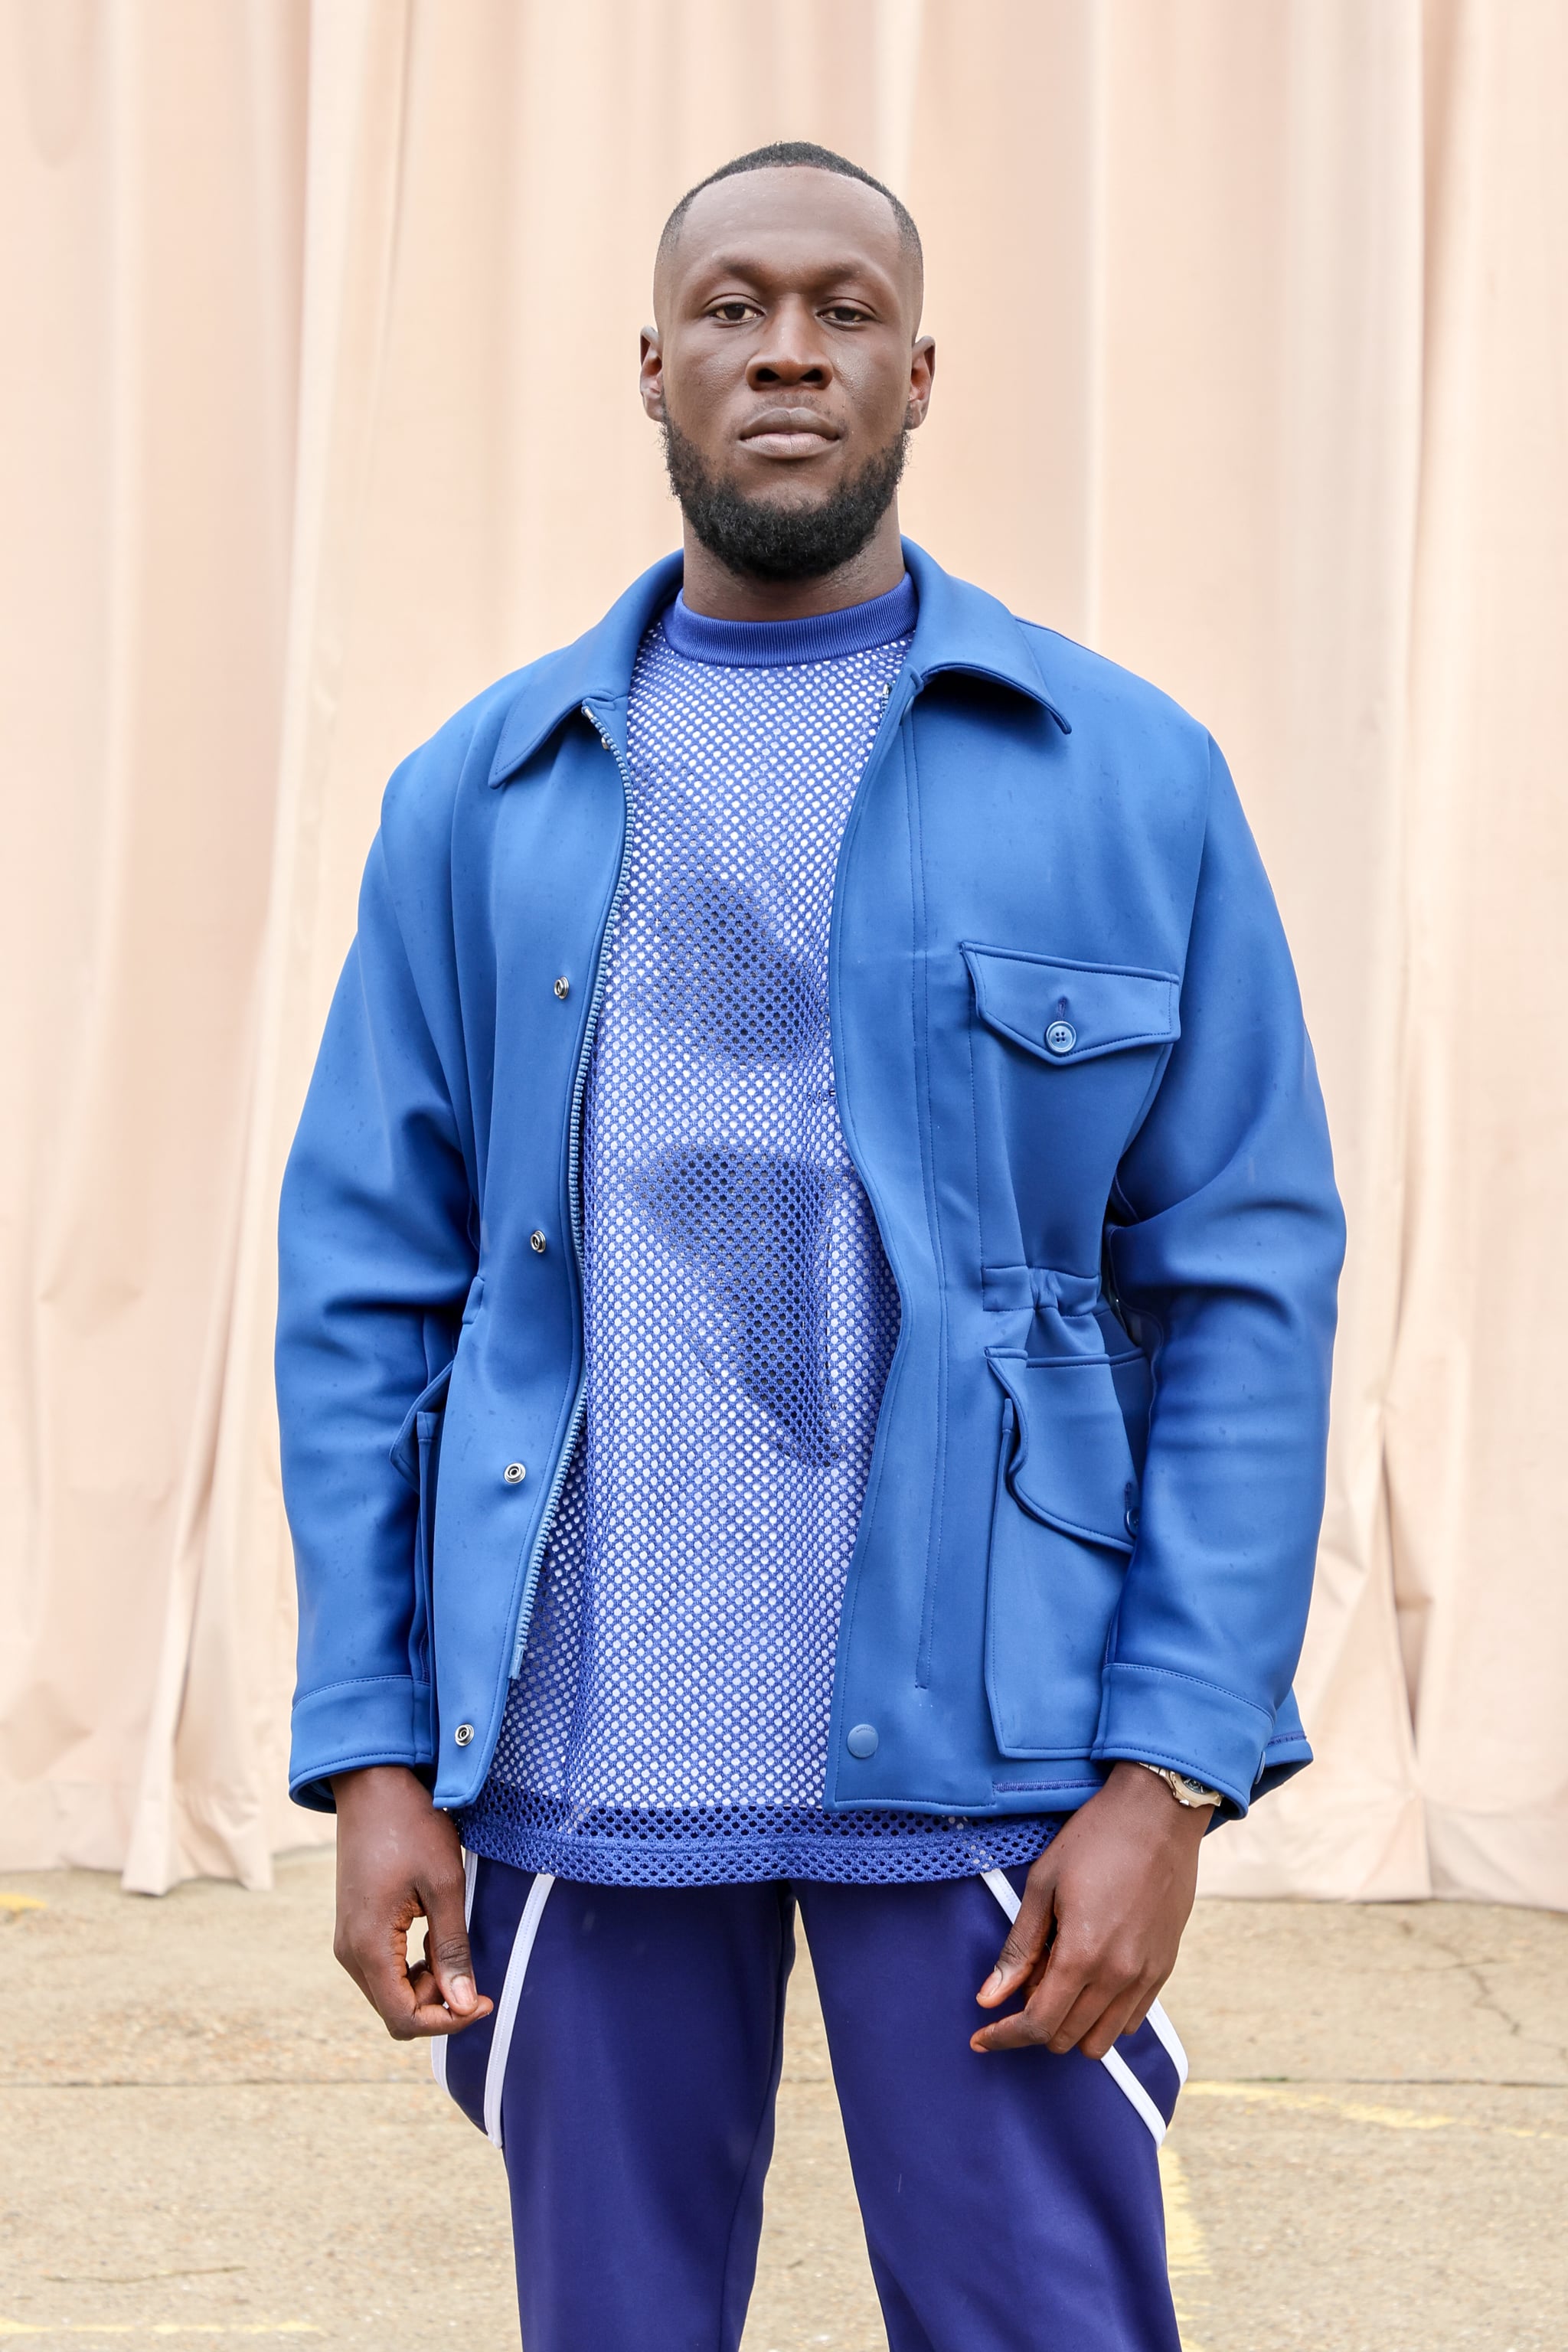 LONDON, ENGLAND - SEPTEMBER 26: Stormzy attends the Burberry Spring/Summer 2023 runway show in Bermondsey on September 26, 2022 in London, England. (Photo by David M. Benett/Dave Benett/Getty Images for Burberry)